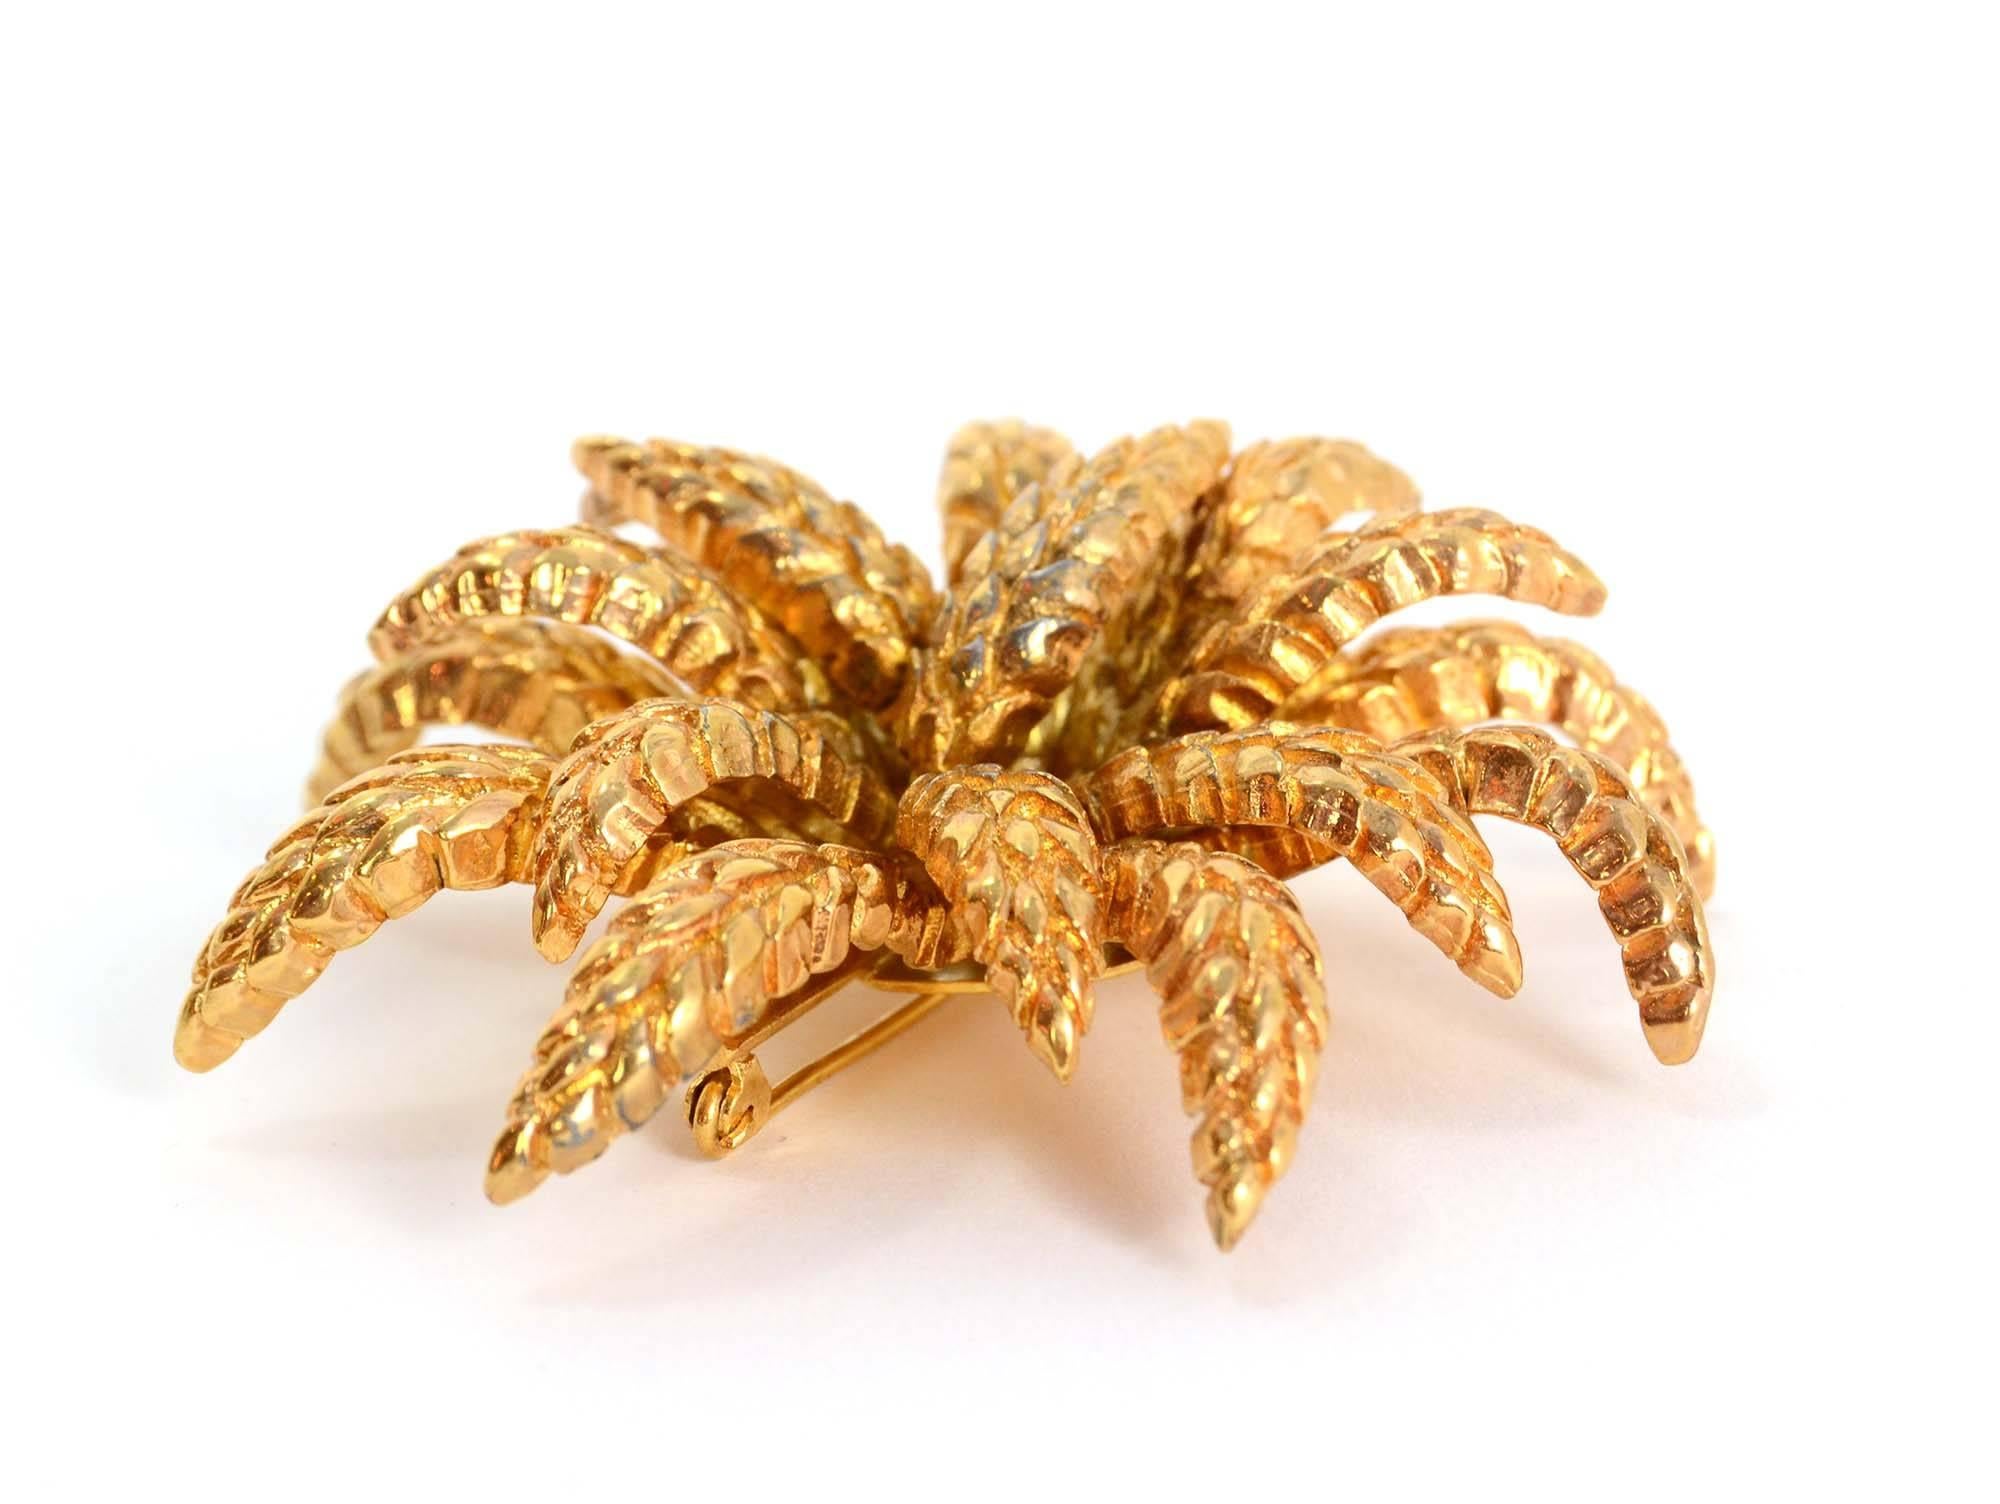 Chanel Vintage '89 Gold Flower Brooch
Features leafy texture throughout
Made in: France
Year of Production: 1989
Stamp: 2 CC 9
Closure: Pin back closure
Color: Goldtone
Materials: Metal
Overall Condition: Excellent condition with no real